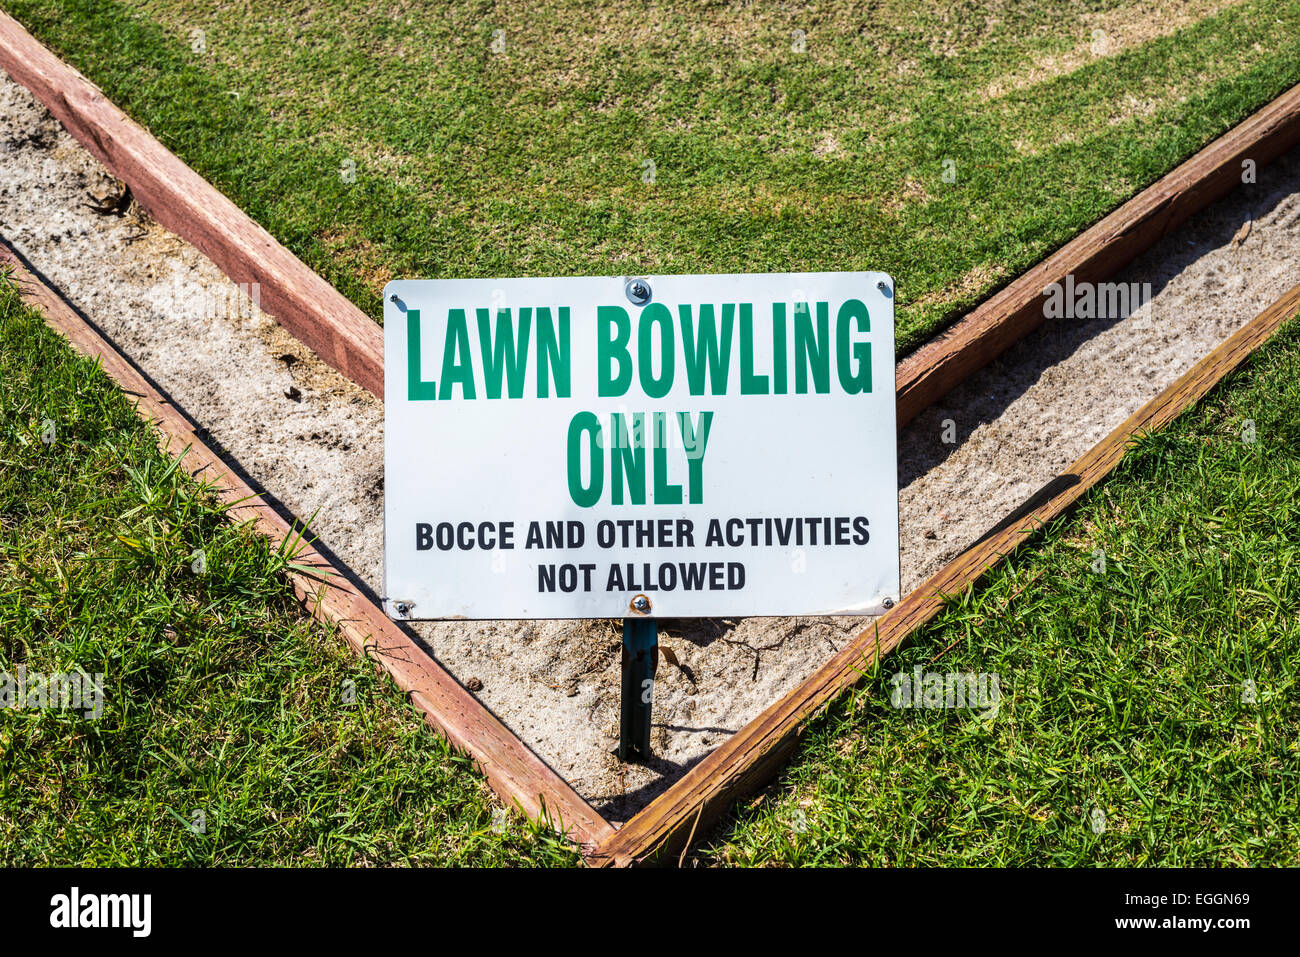 Lawn Bowling Only warning sign. Balboa Park, California, United States. Stock Photo